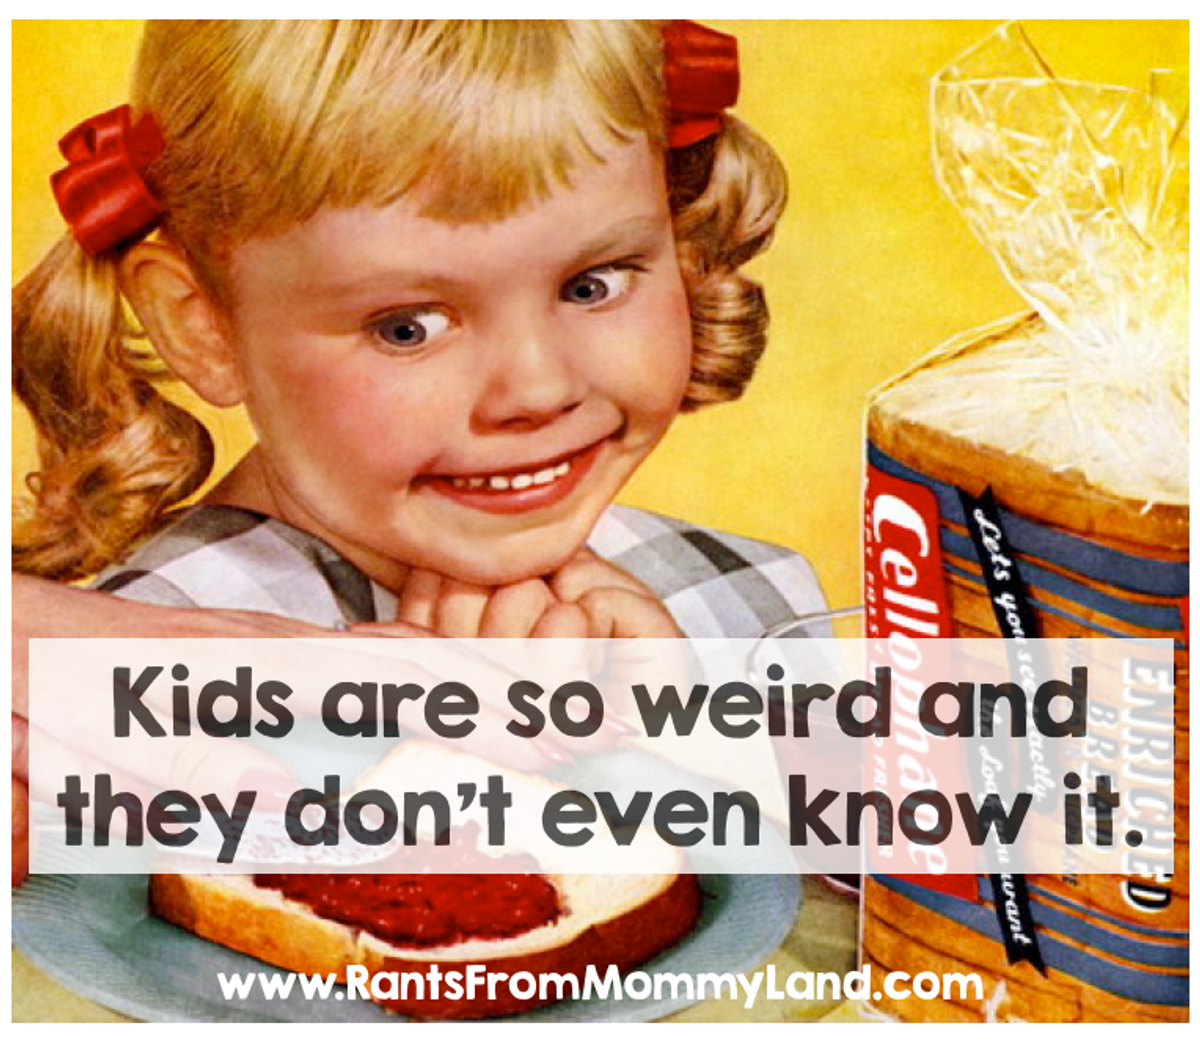 12 Strange And Funny Things Kids Said to Me (This Week)